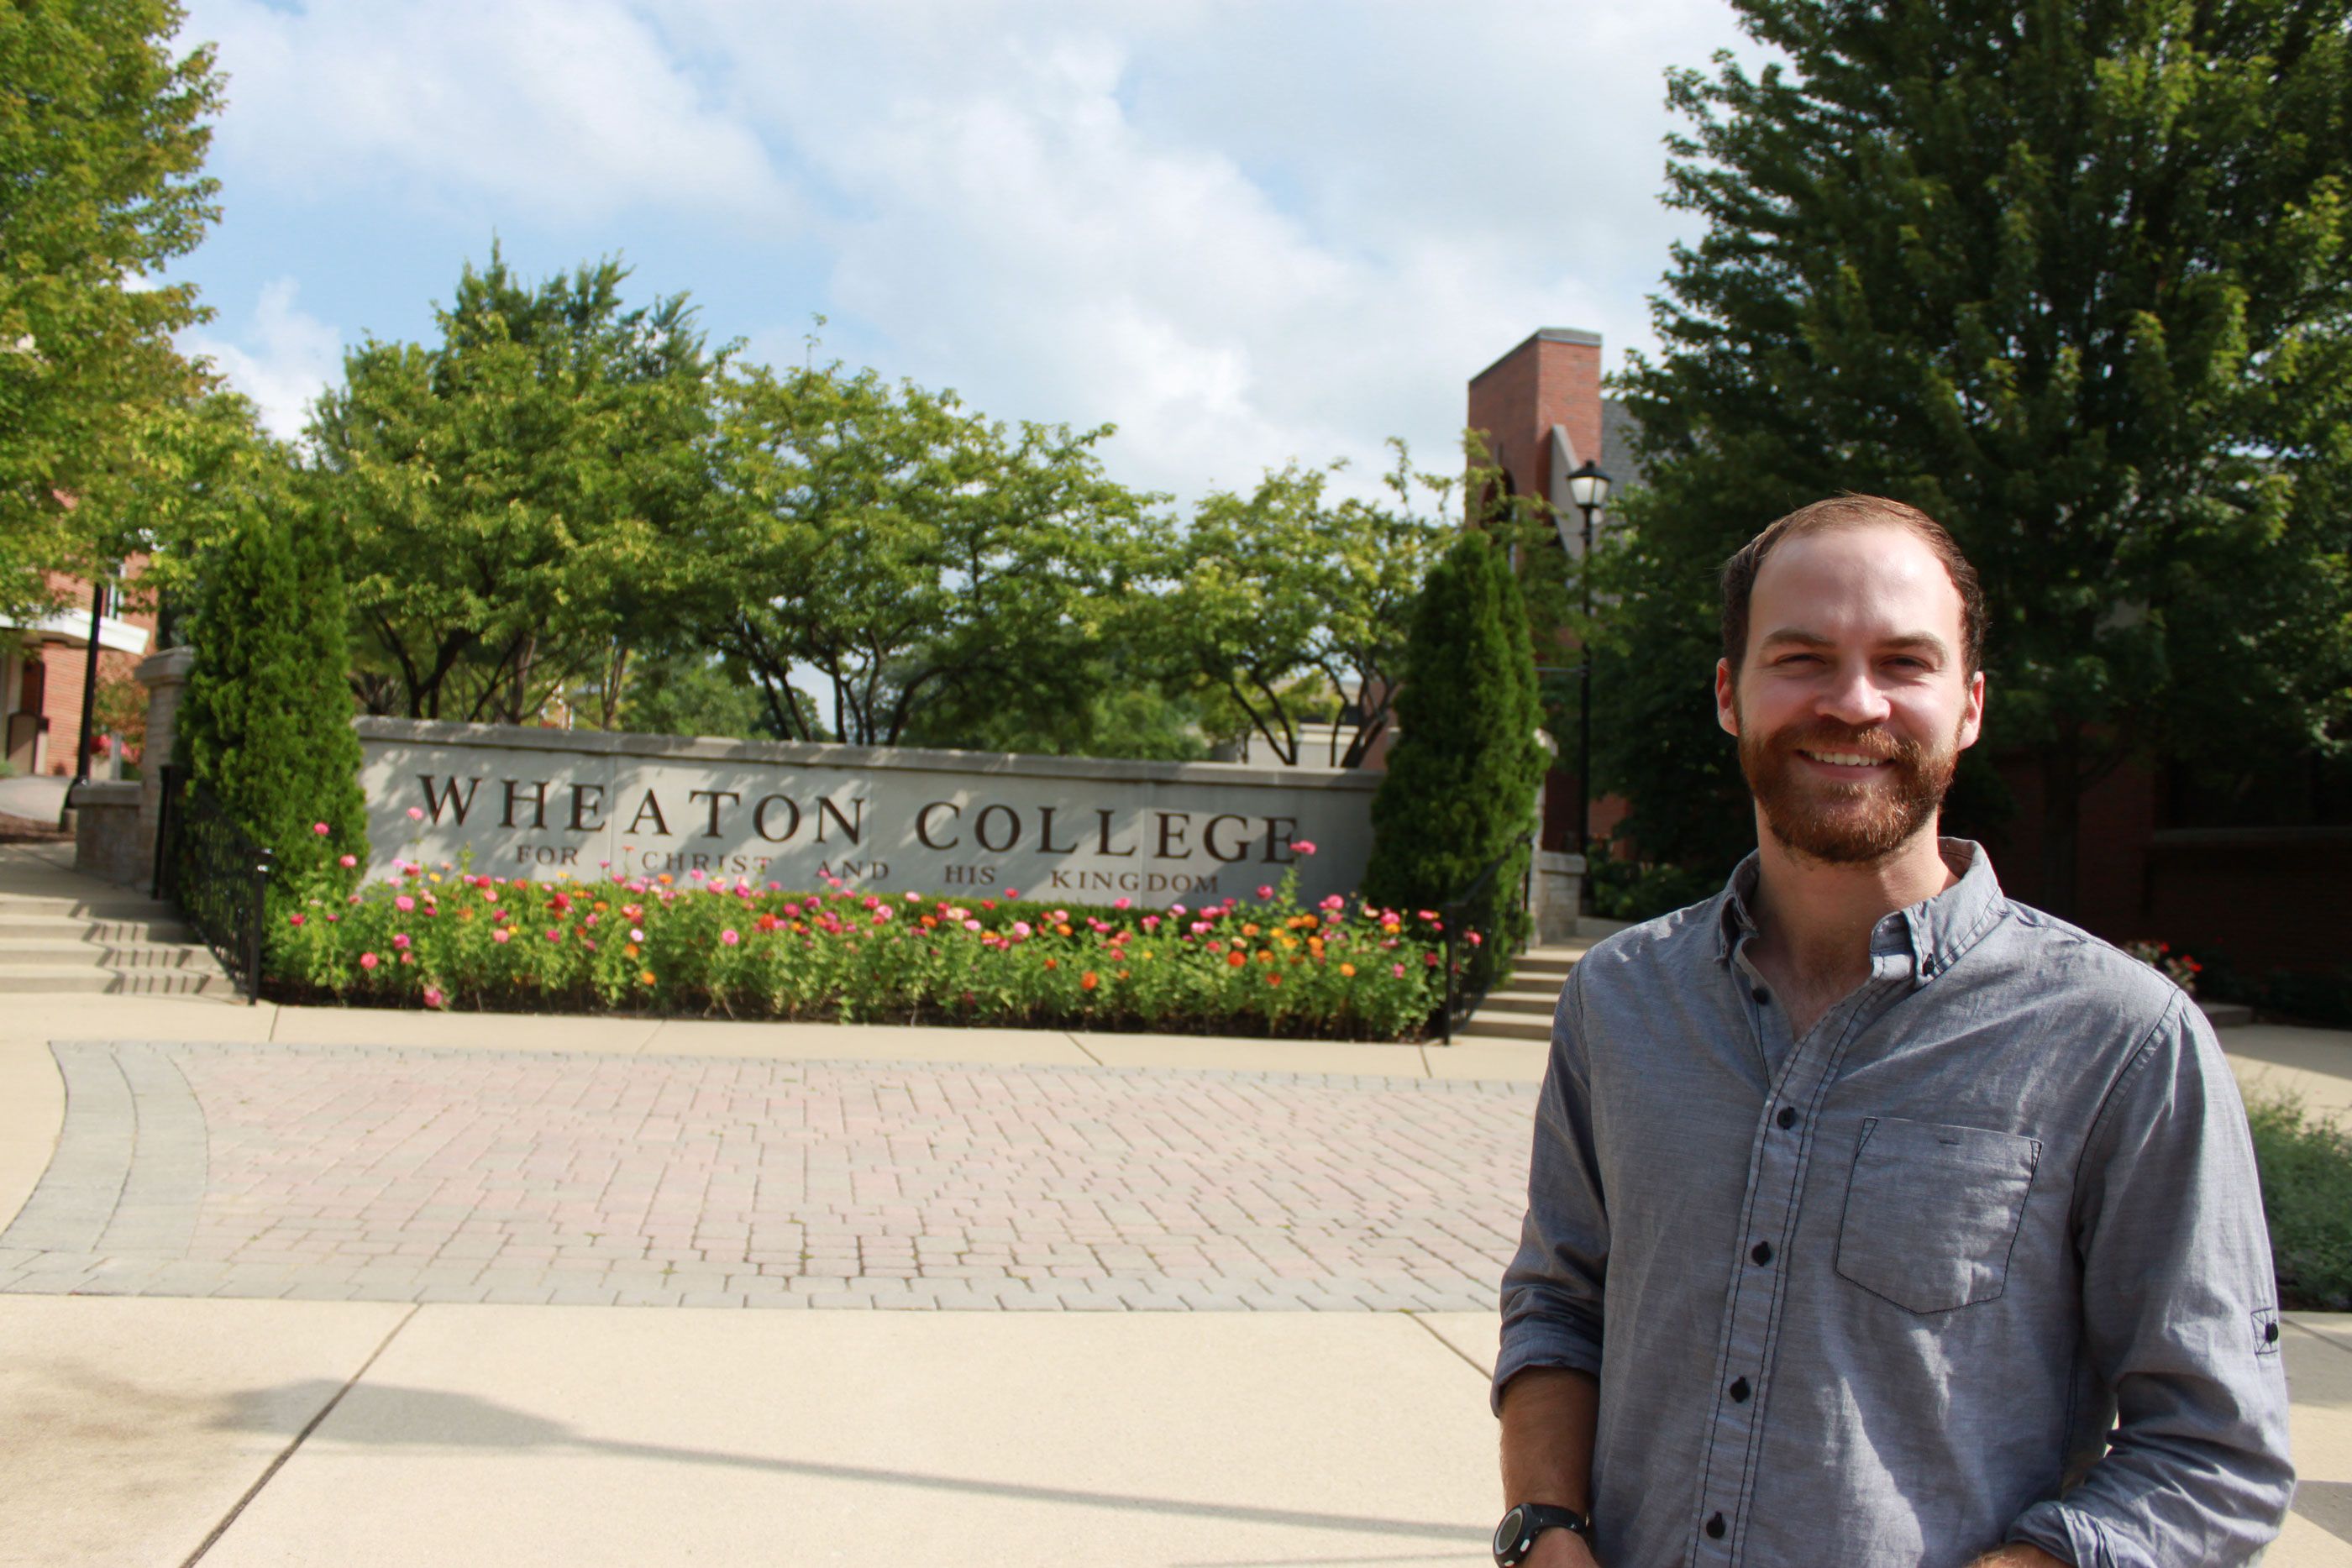 Michael Sawyer standing at Wheaton College sign